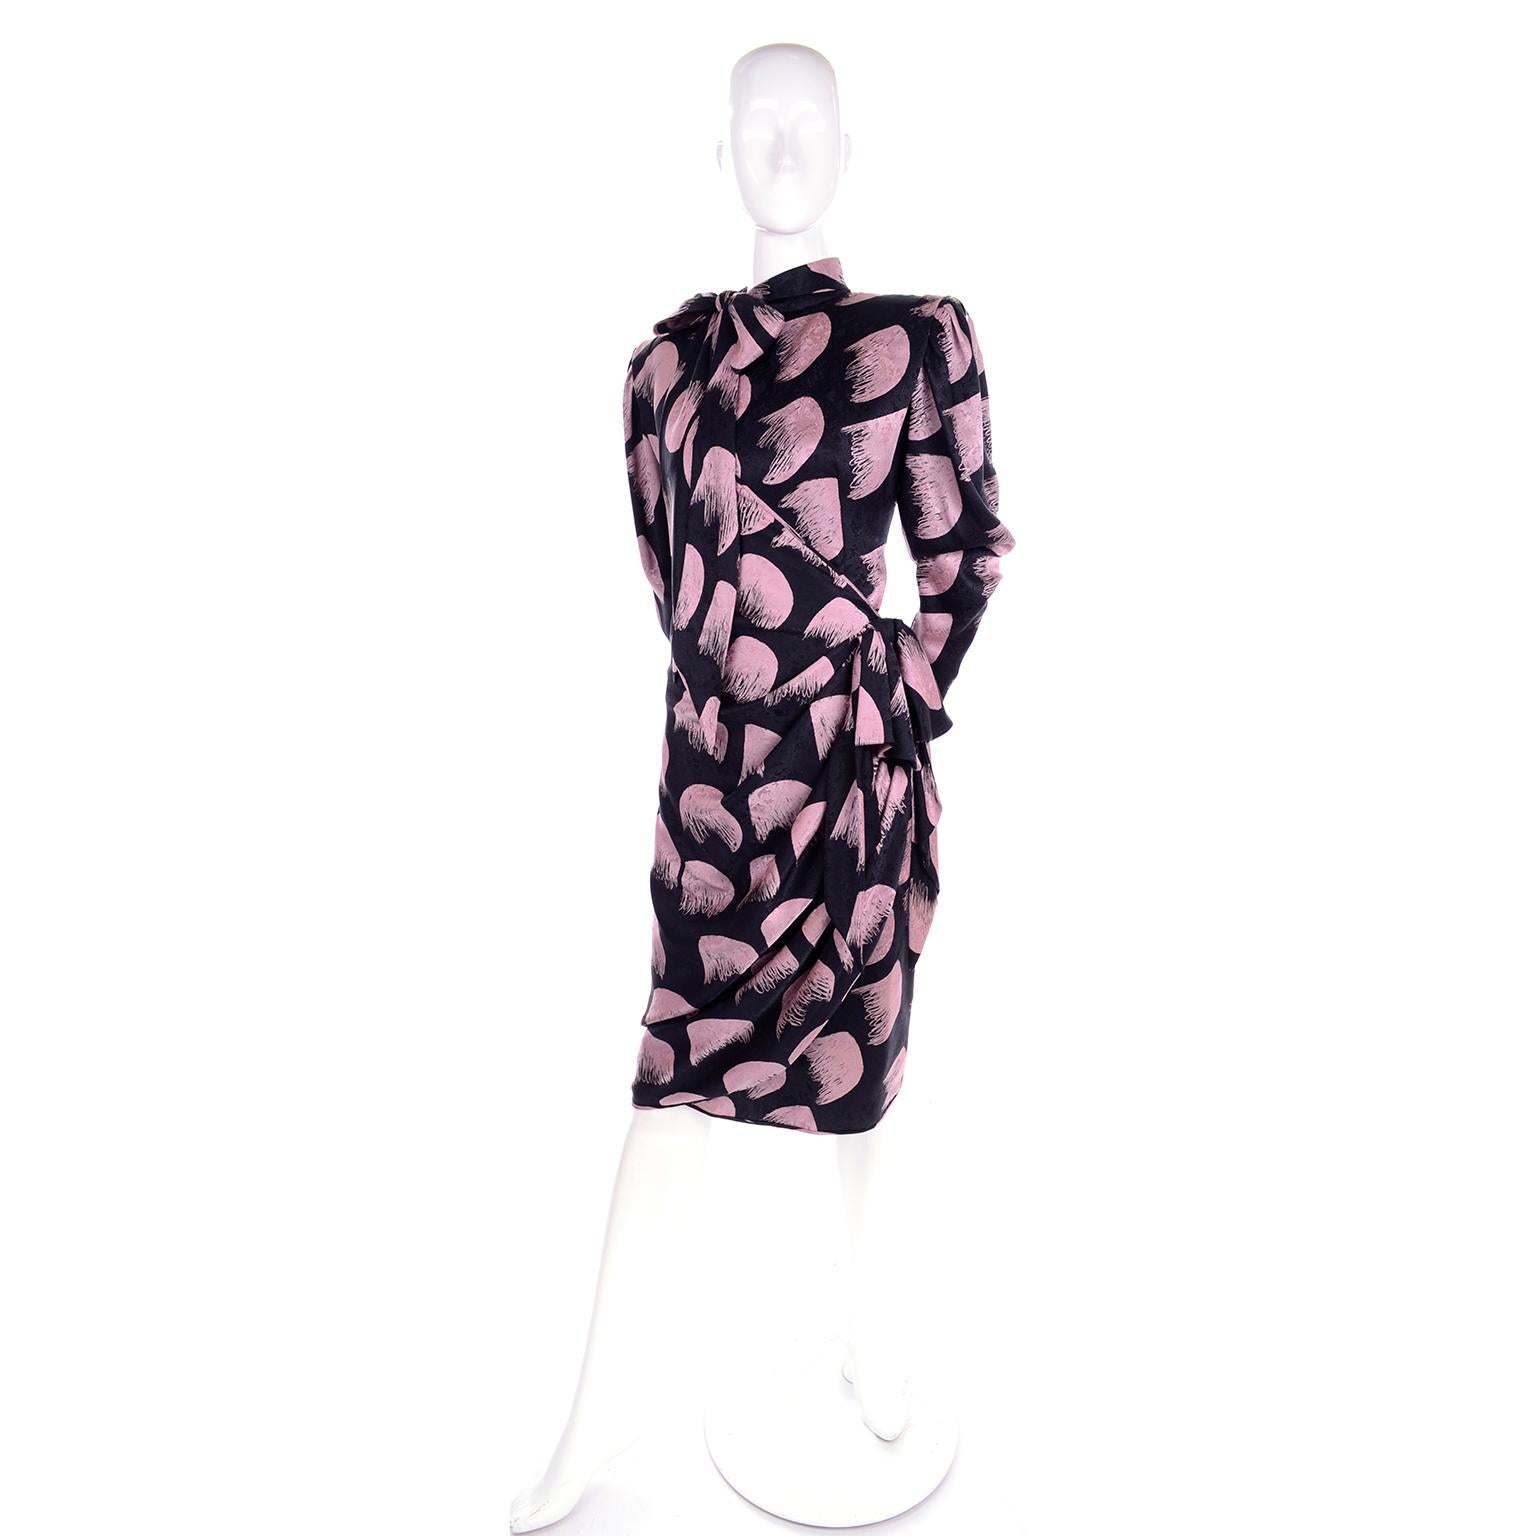 This is a lovely vintage dress from Emanuel Ungaro from the 1980's that is unworn with its original tag still attached.  This beautiful Ungaro Parallele wrap style dress was made in Italy and is beautifully draped and has shoulder pads, an attached